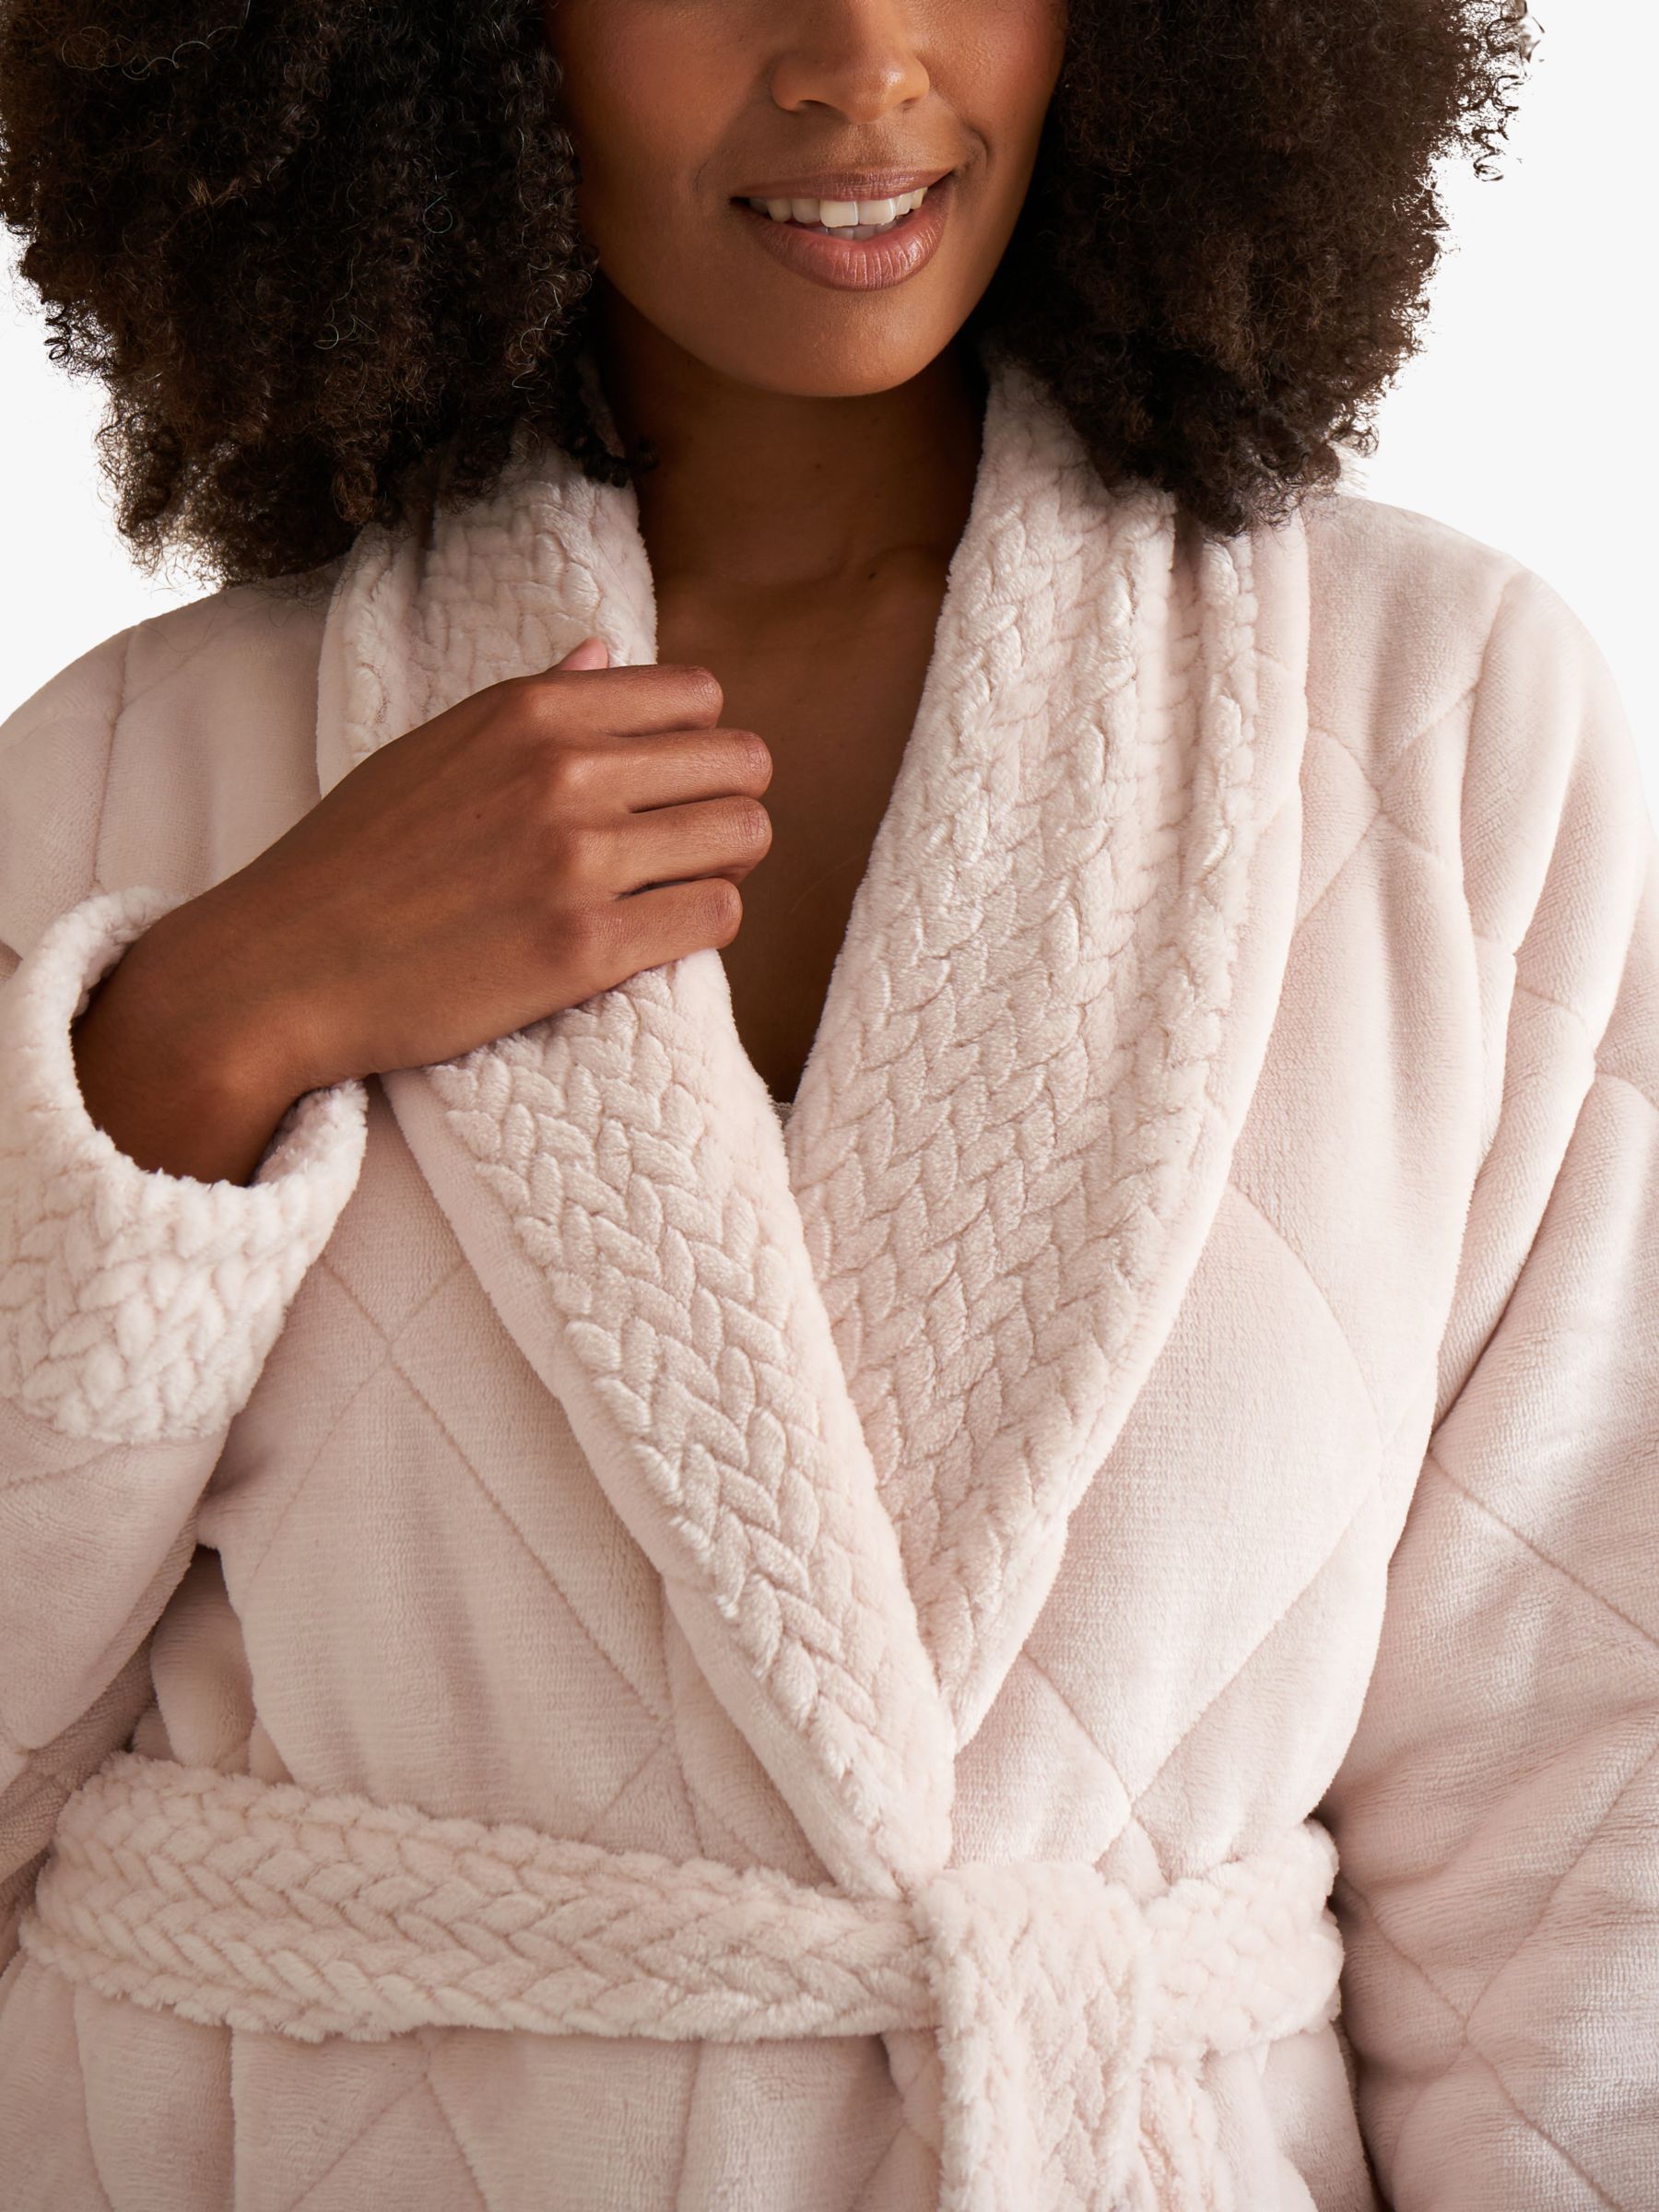 Buy Pretty You London Quilted Velour Dressing Gown Online at johnlewis.com